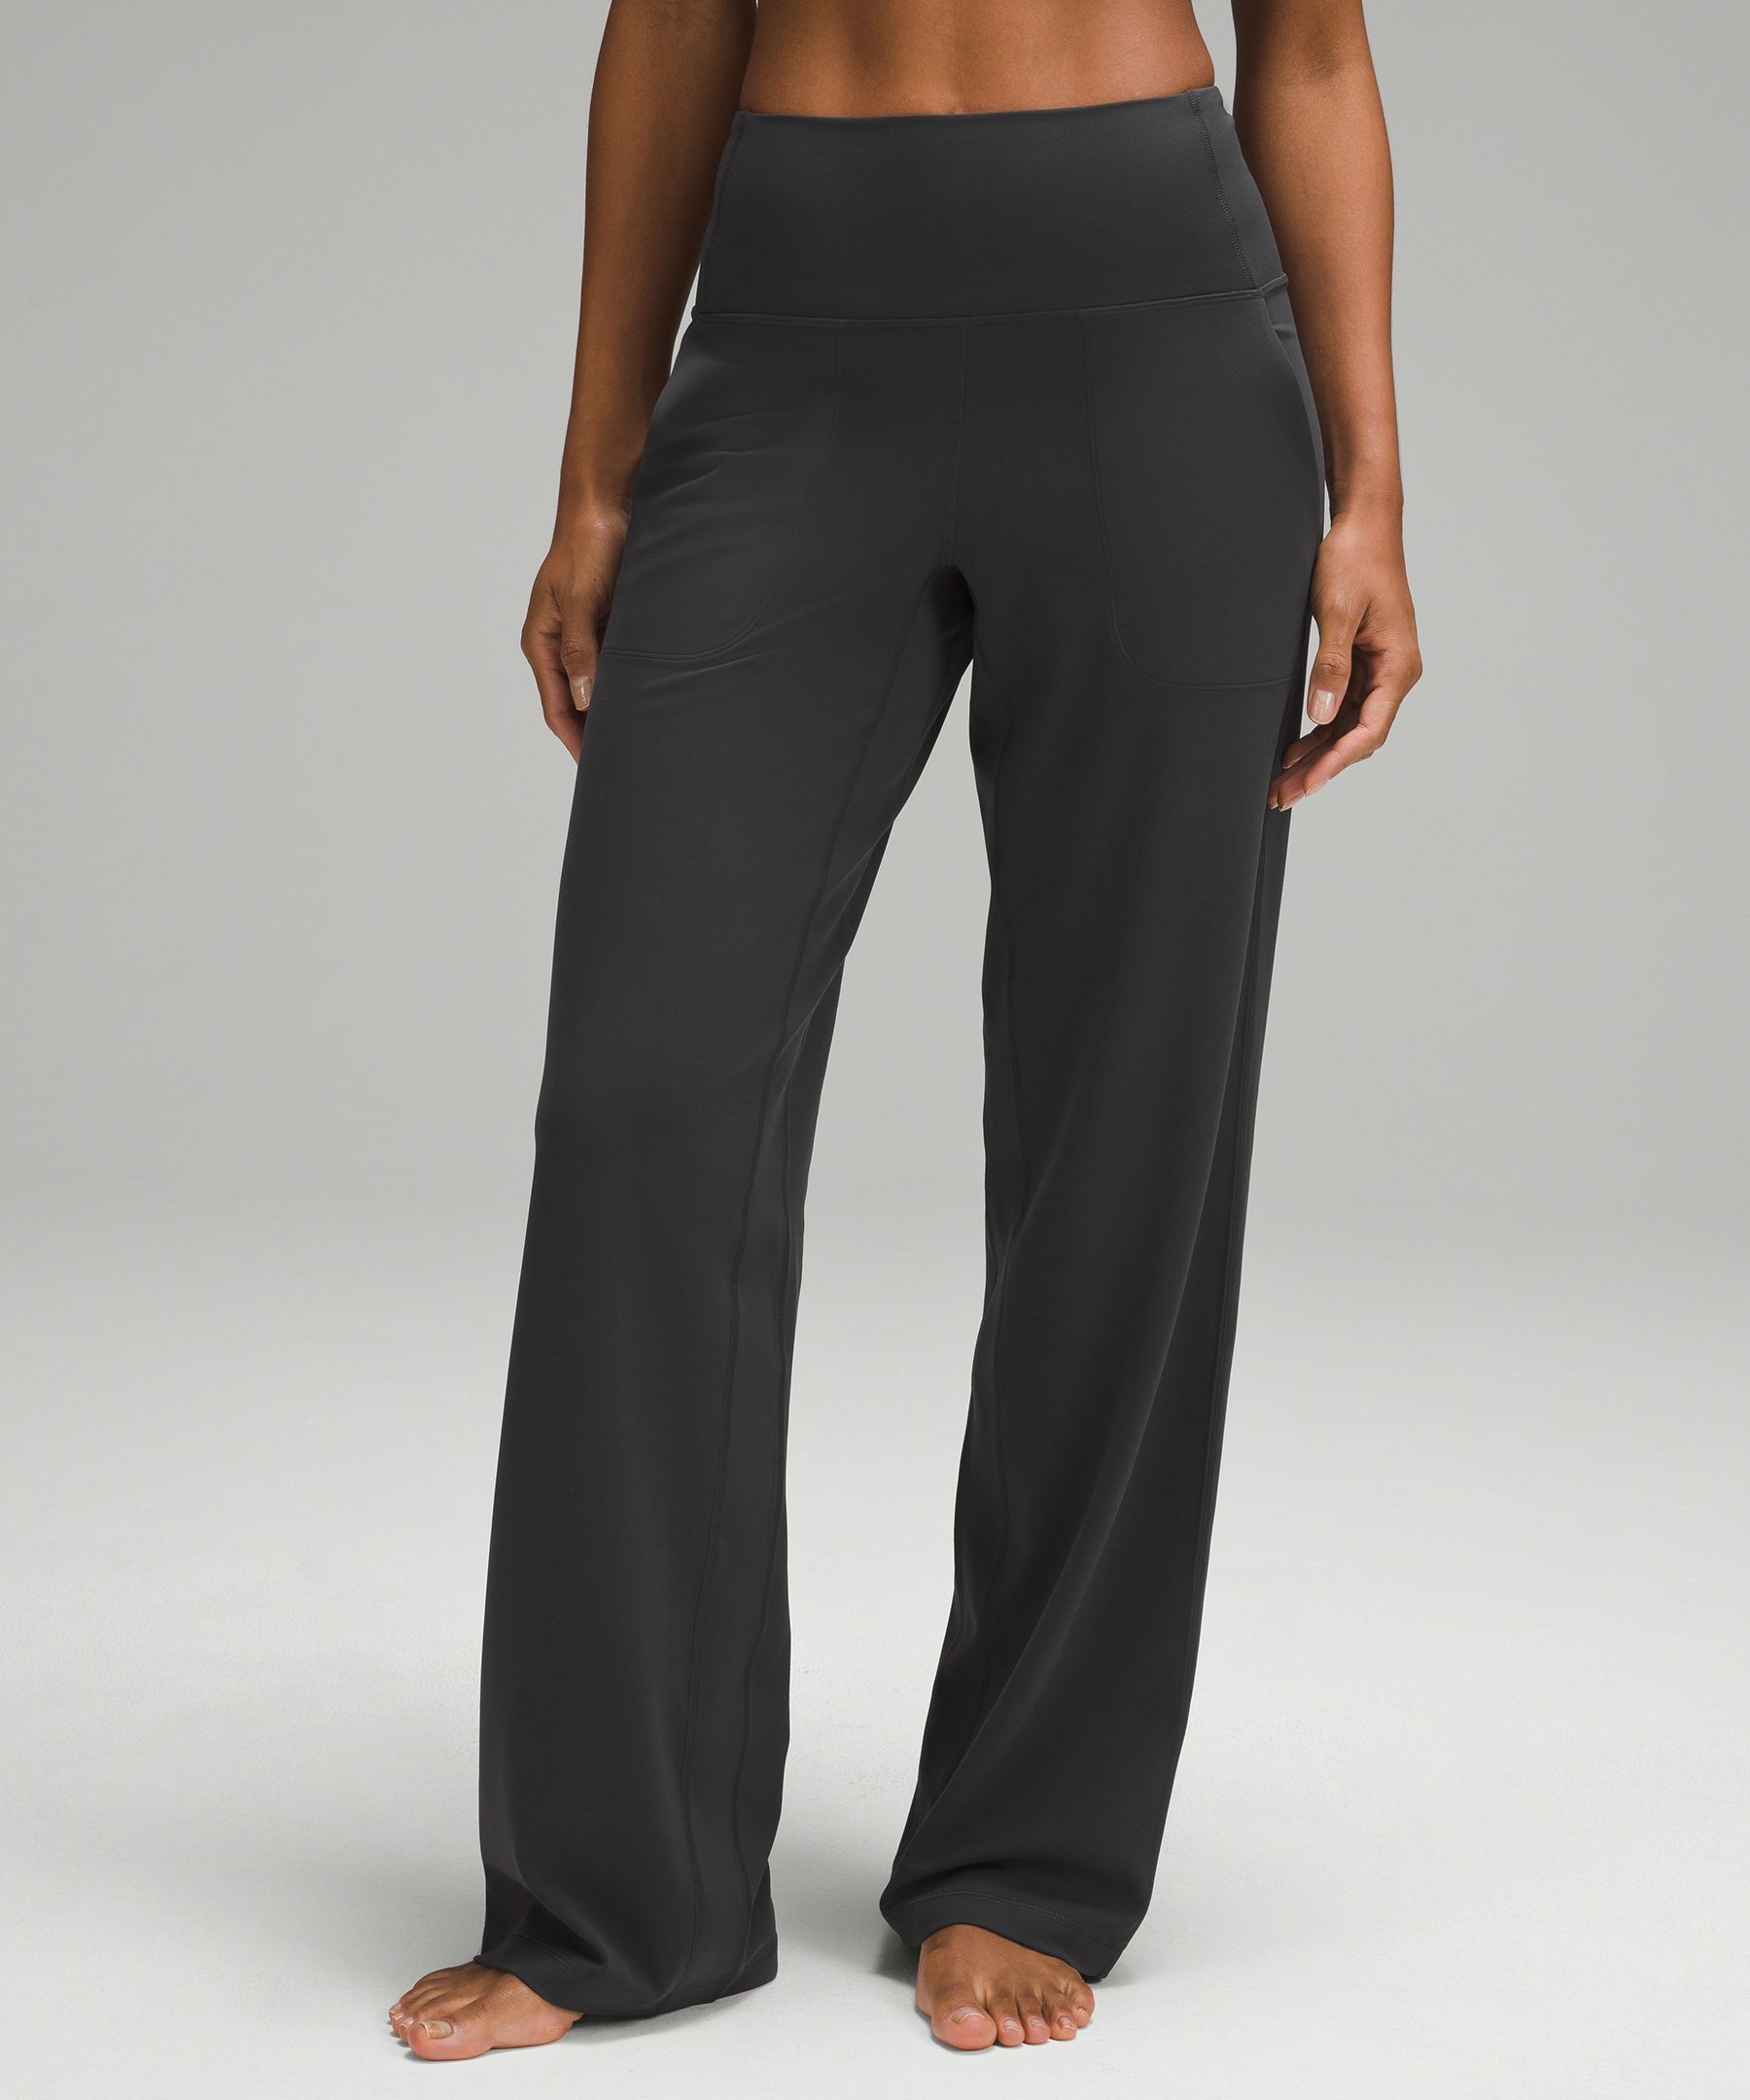 Trying new styles to look more casual - Align wide leg in back are so comfy  : r/lululemon